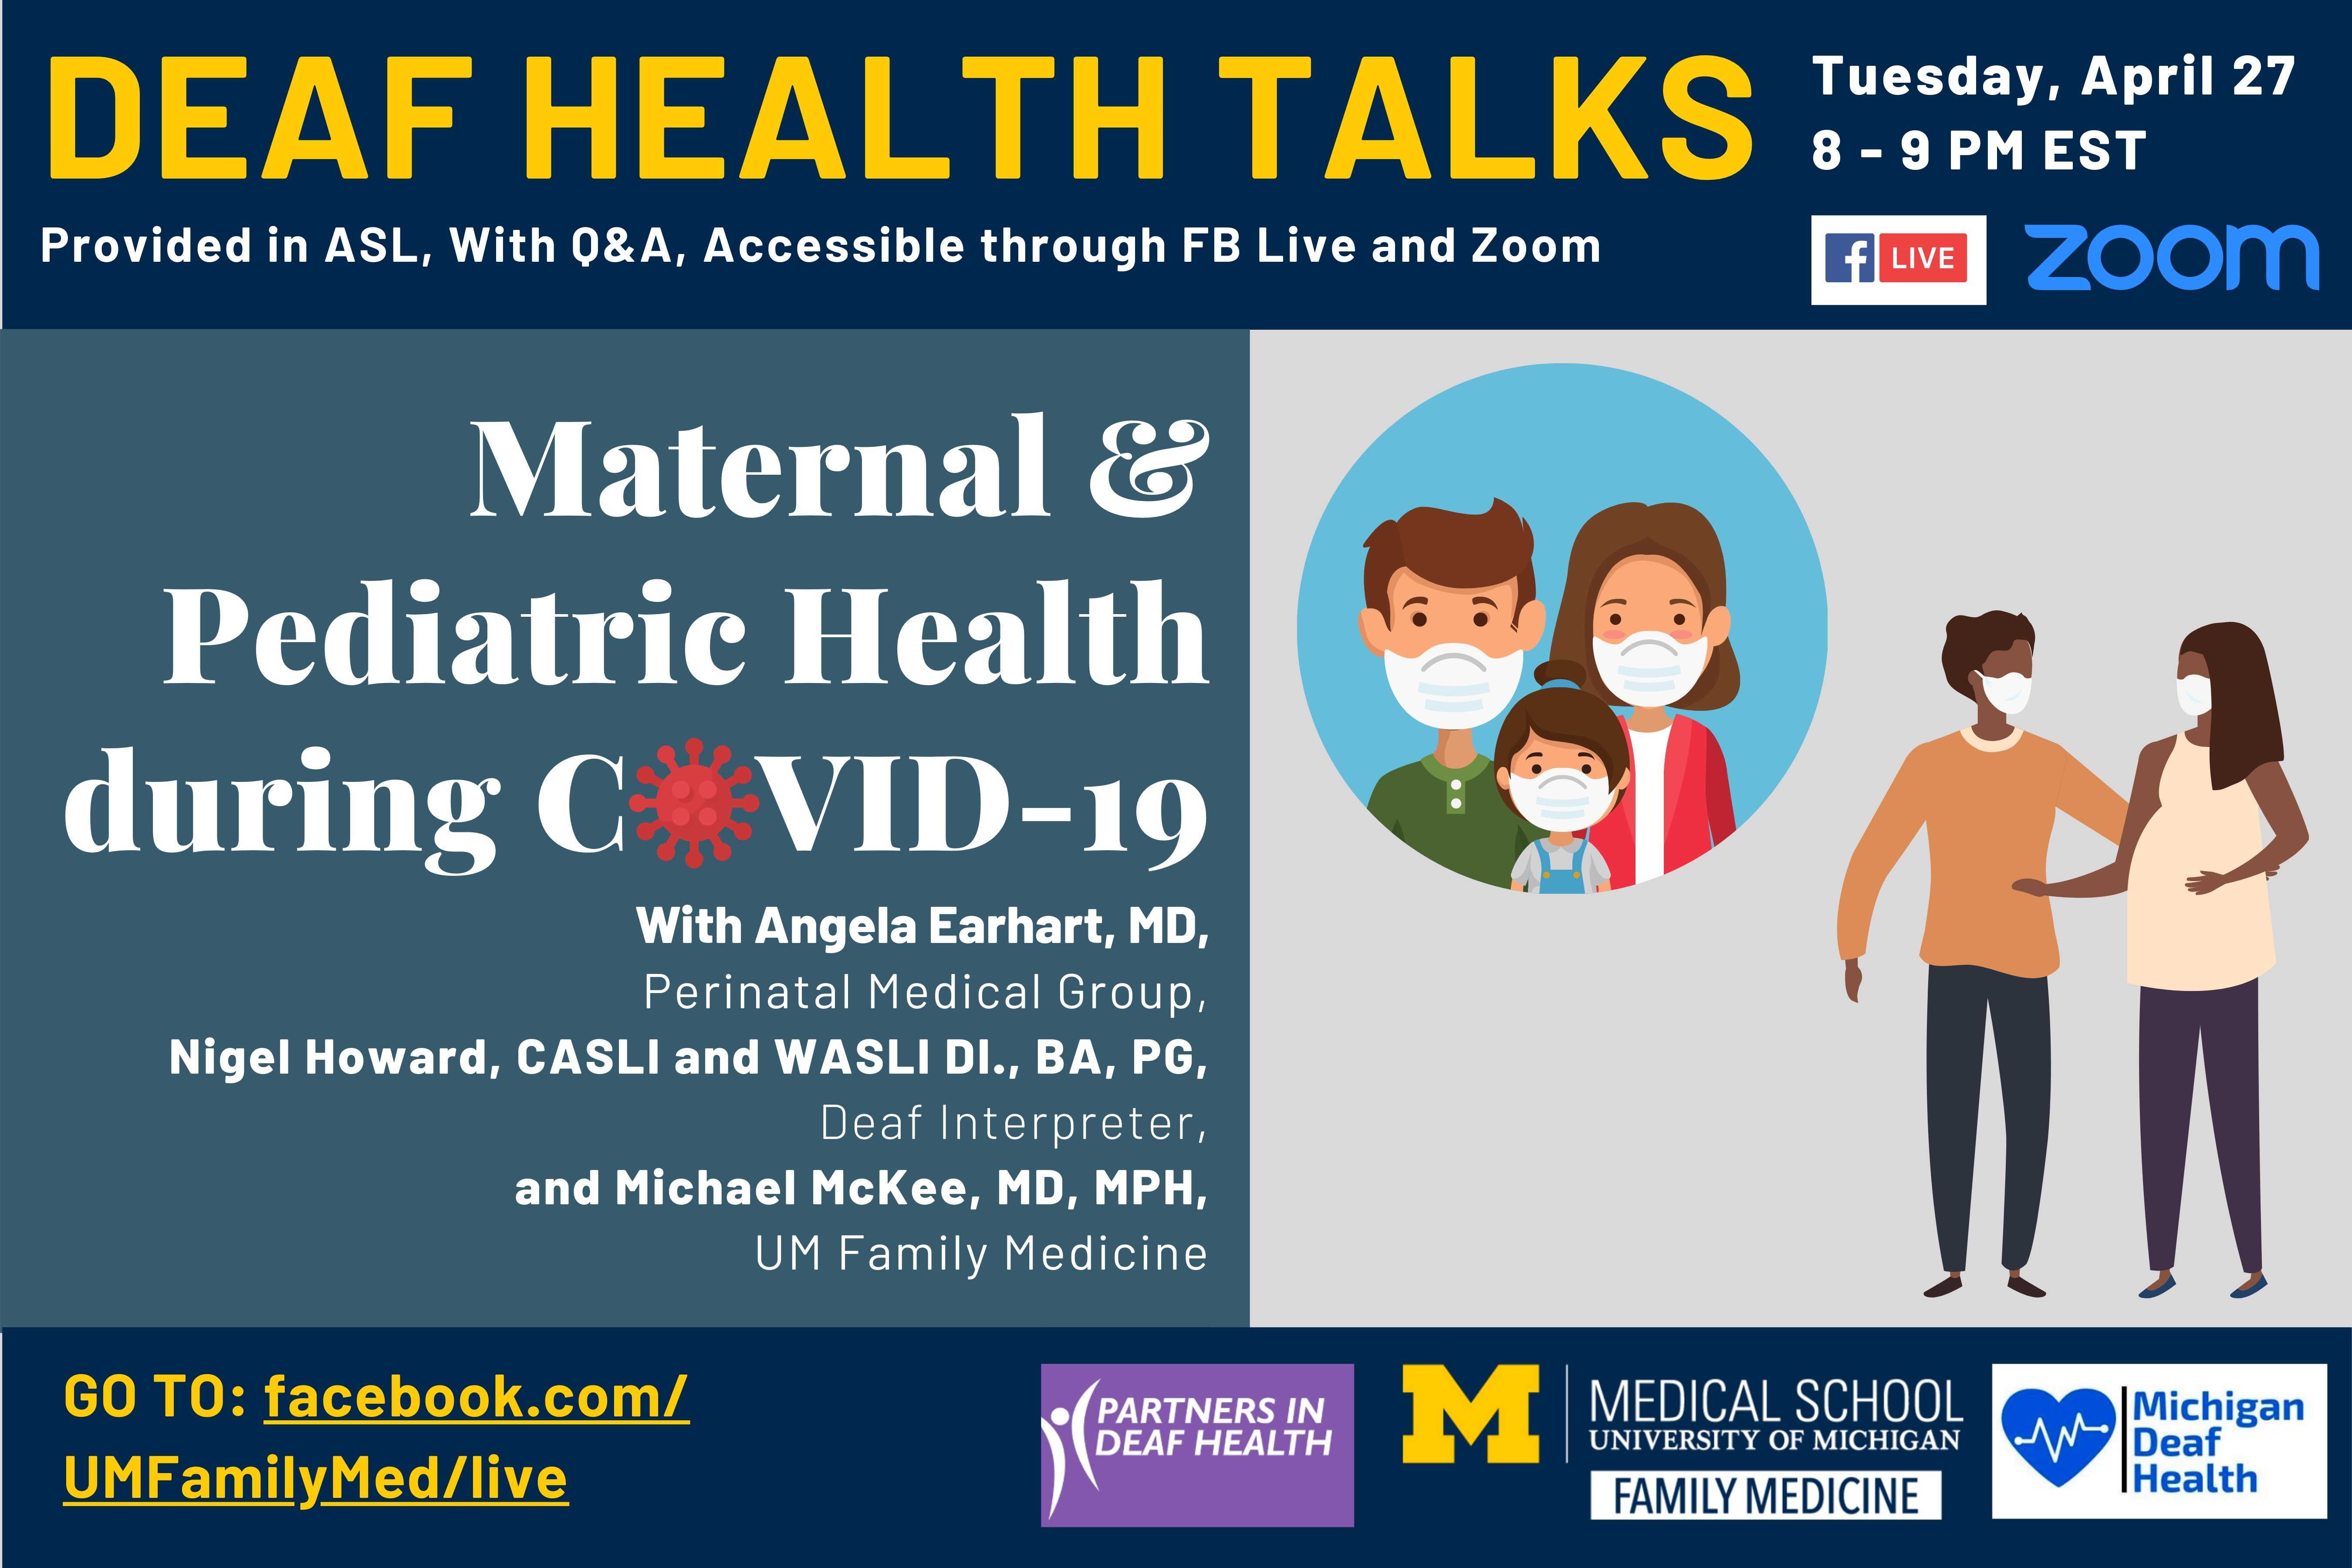 Deaf Health Talks, provided in ASL, with Q&A. Happening Tuesday, April 27, 8 to 9 PM EST, on Facebook Live and Zoom. Maternal and Pediatric Health during COVID-10, with Angela Earhart, MD from Perinatal Medical Group, Nigel Howard, CASLI and WASLI, DI, BA